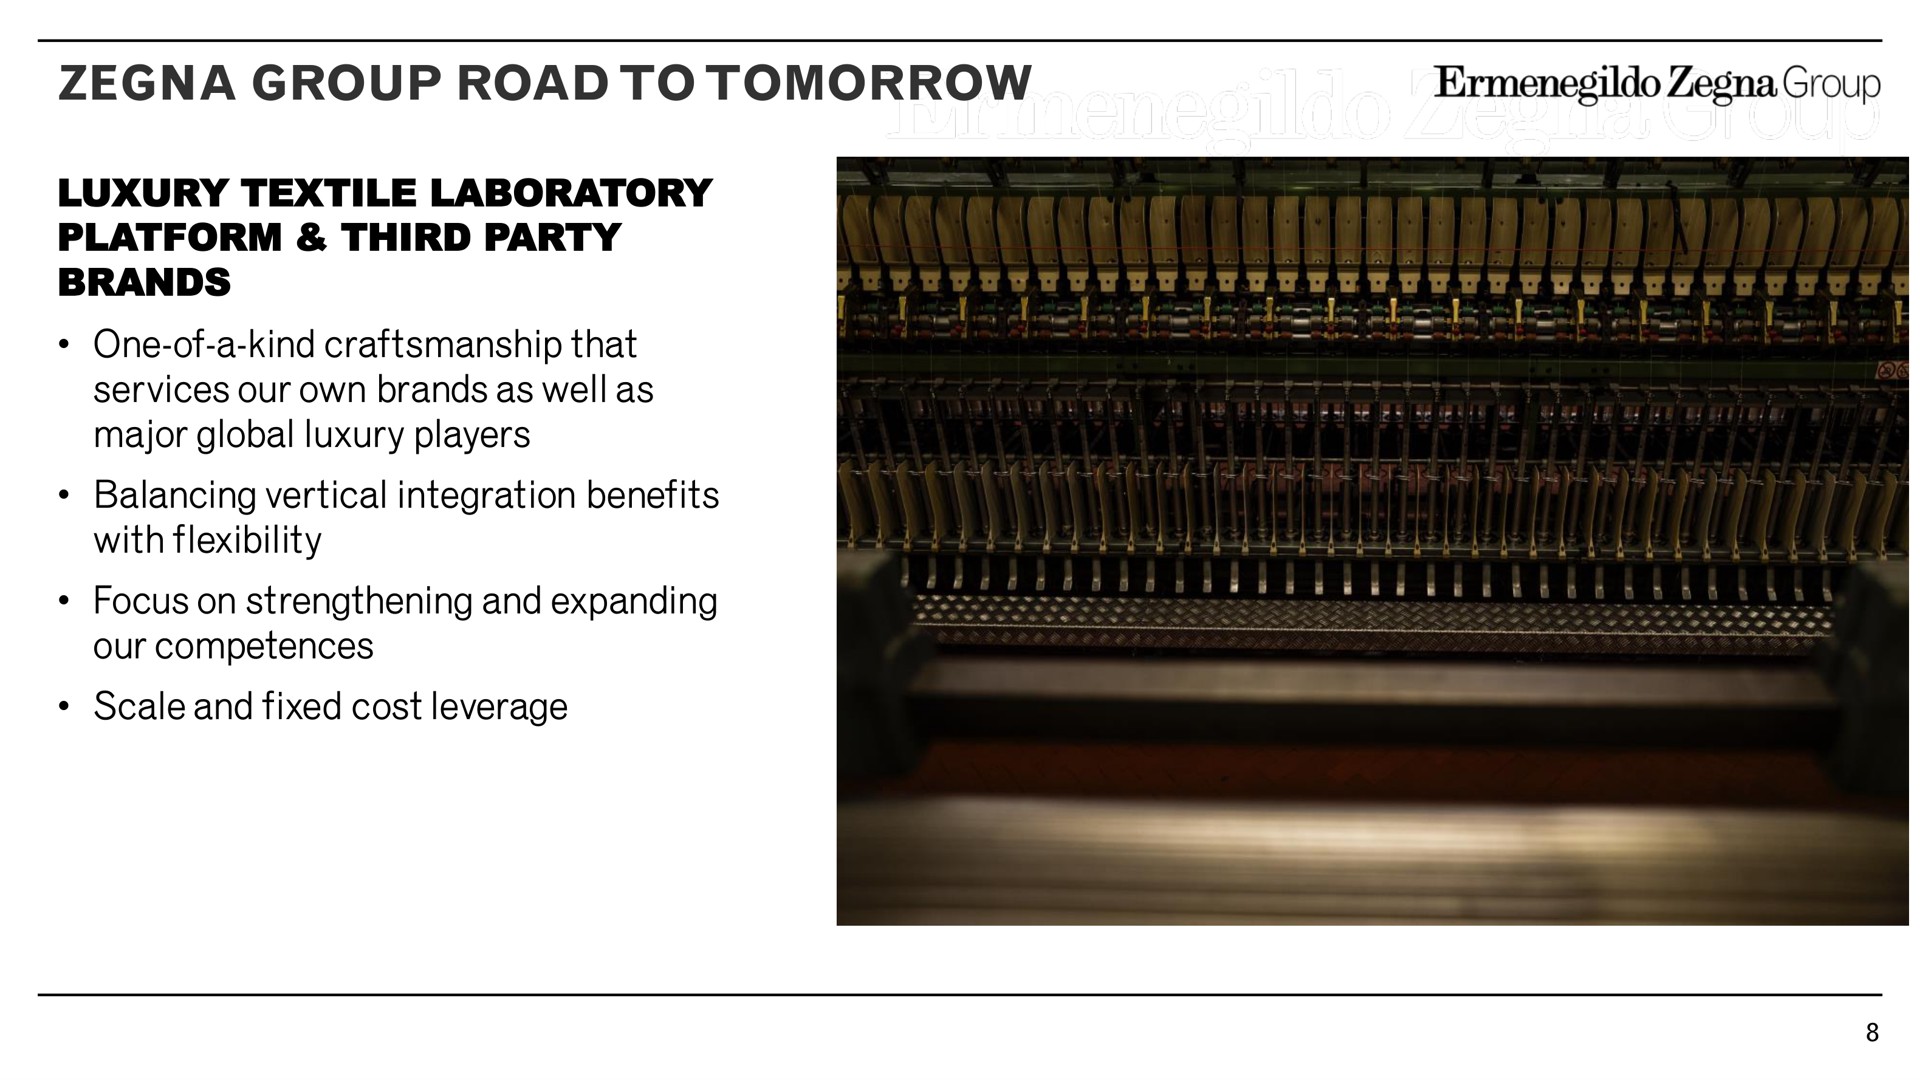 group road to tomorrow luxury textile laboratory platform third party brands one of a kind craftsmanship that services our own brands as well as major global luxury players balancing vertical integration benefits with flexibility focus on strengthening and expanding our competences scale and fixed cost leverage | Zegna